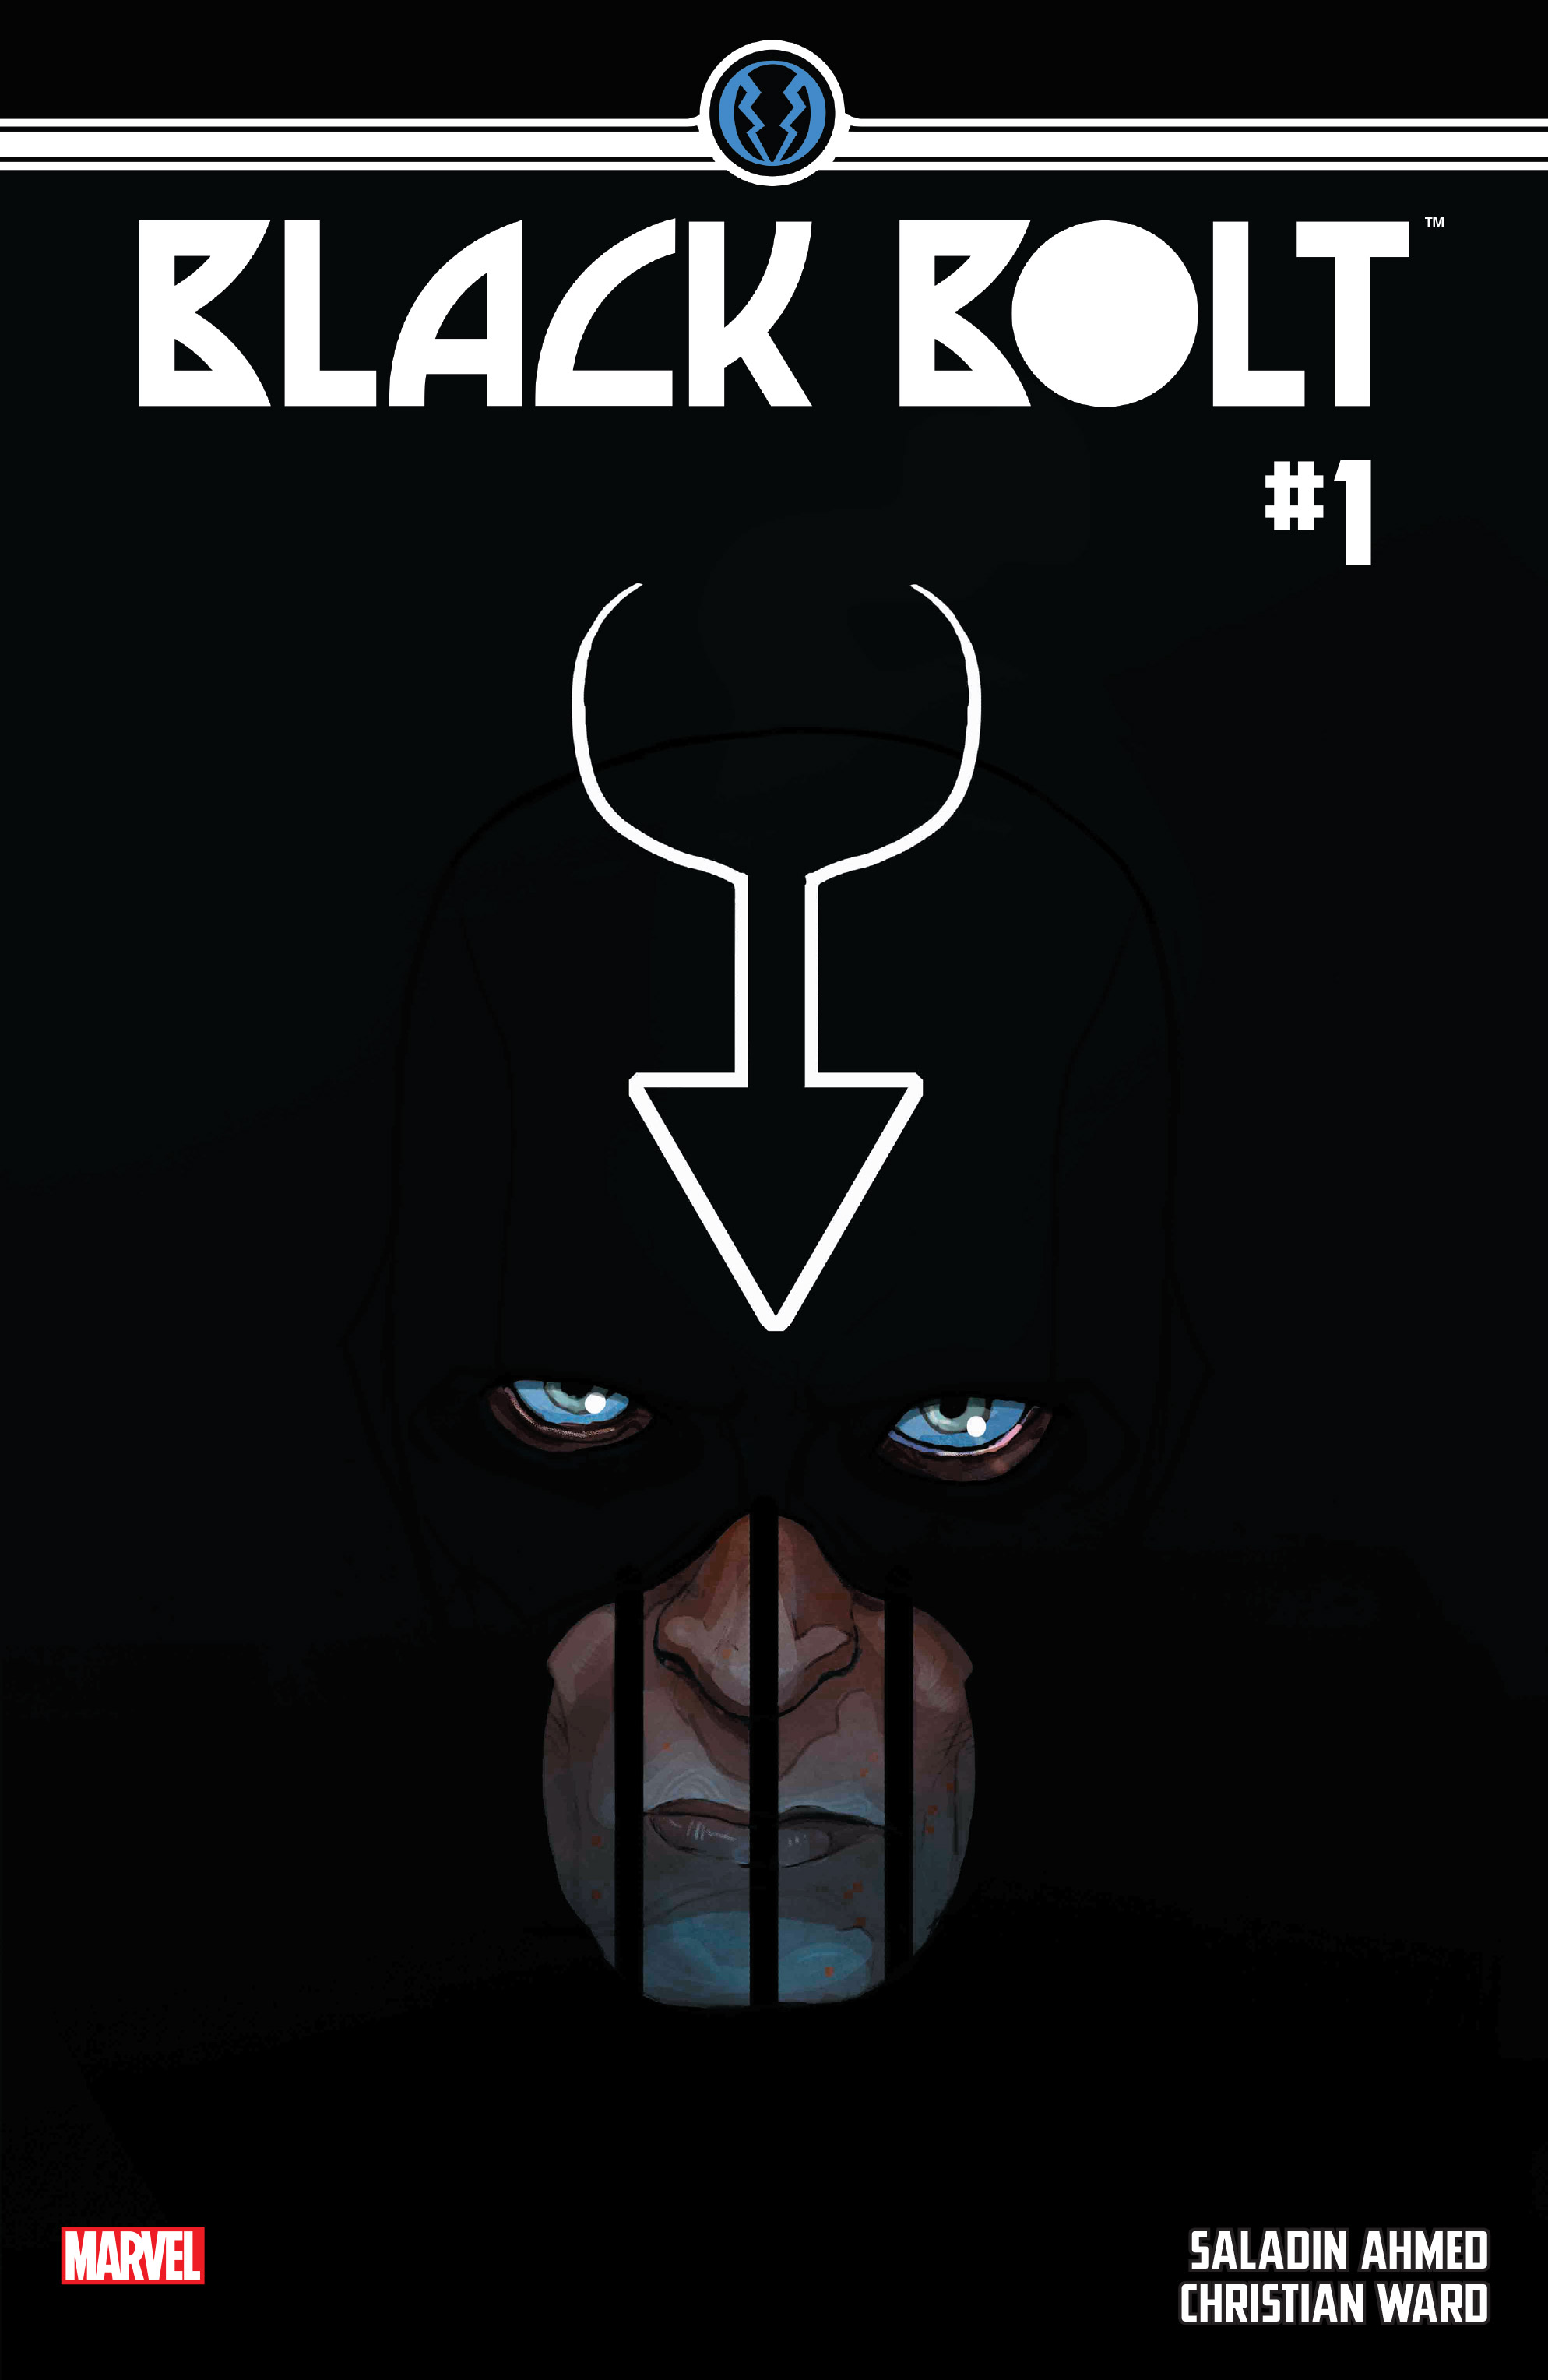 Read online Black Bolt comic -  Issue #1 - 1